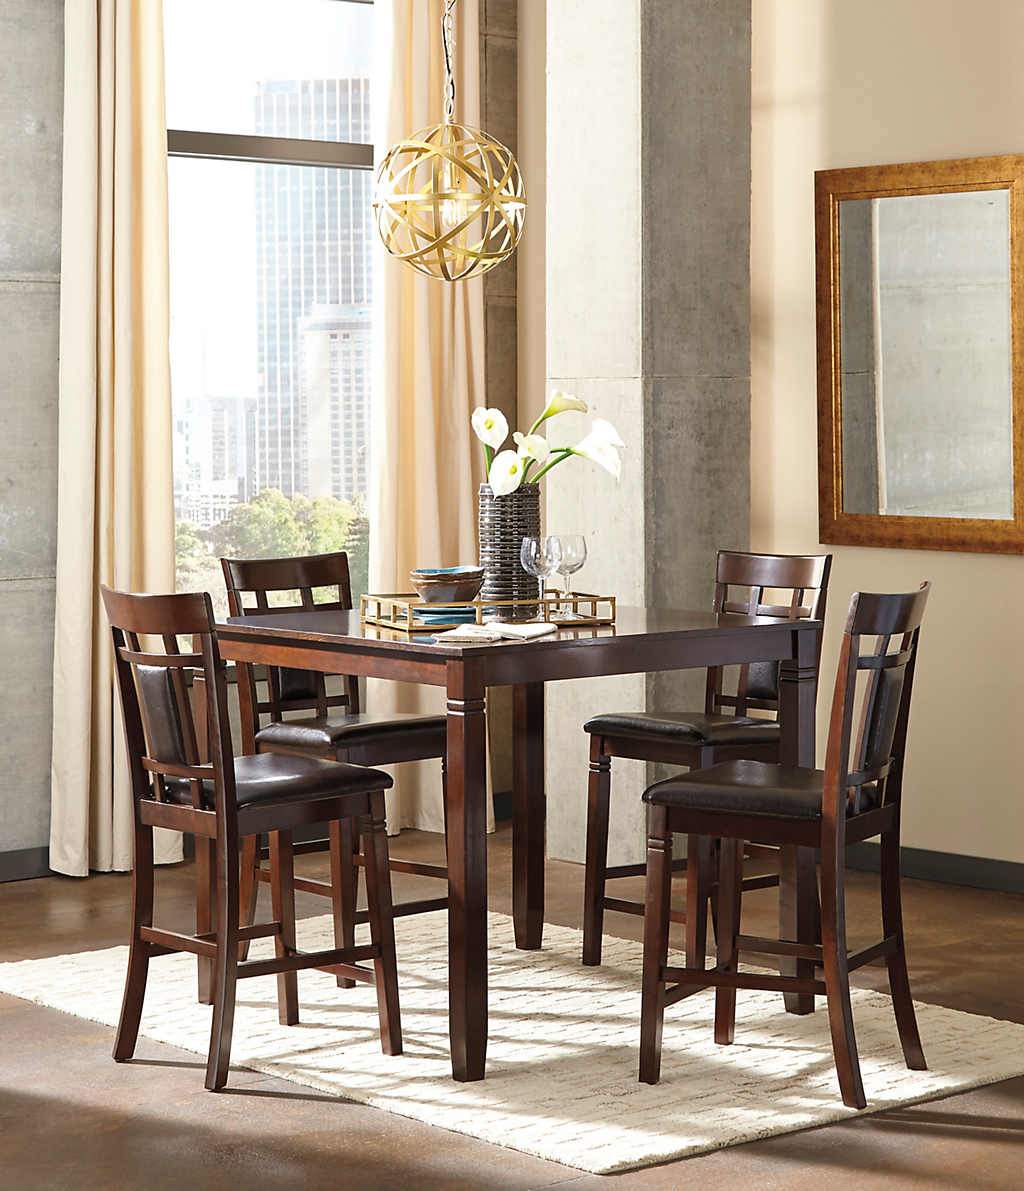 Bennox Table with Barstools